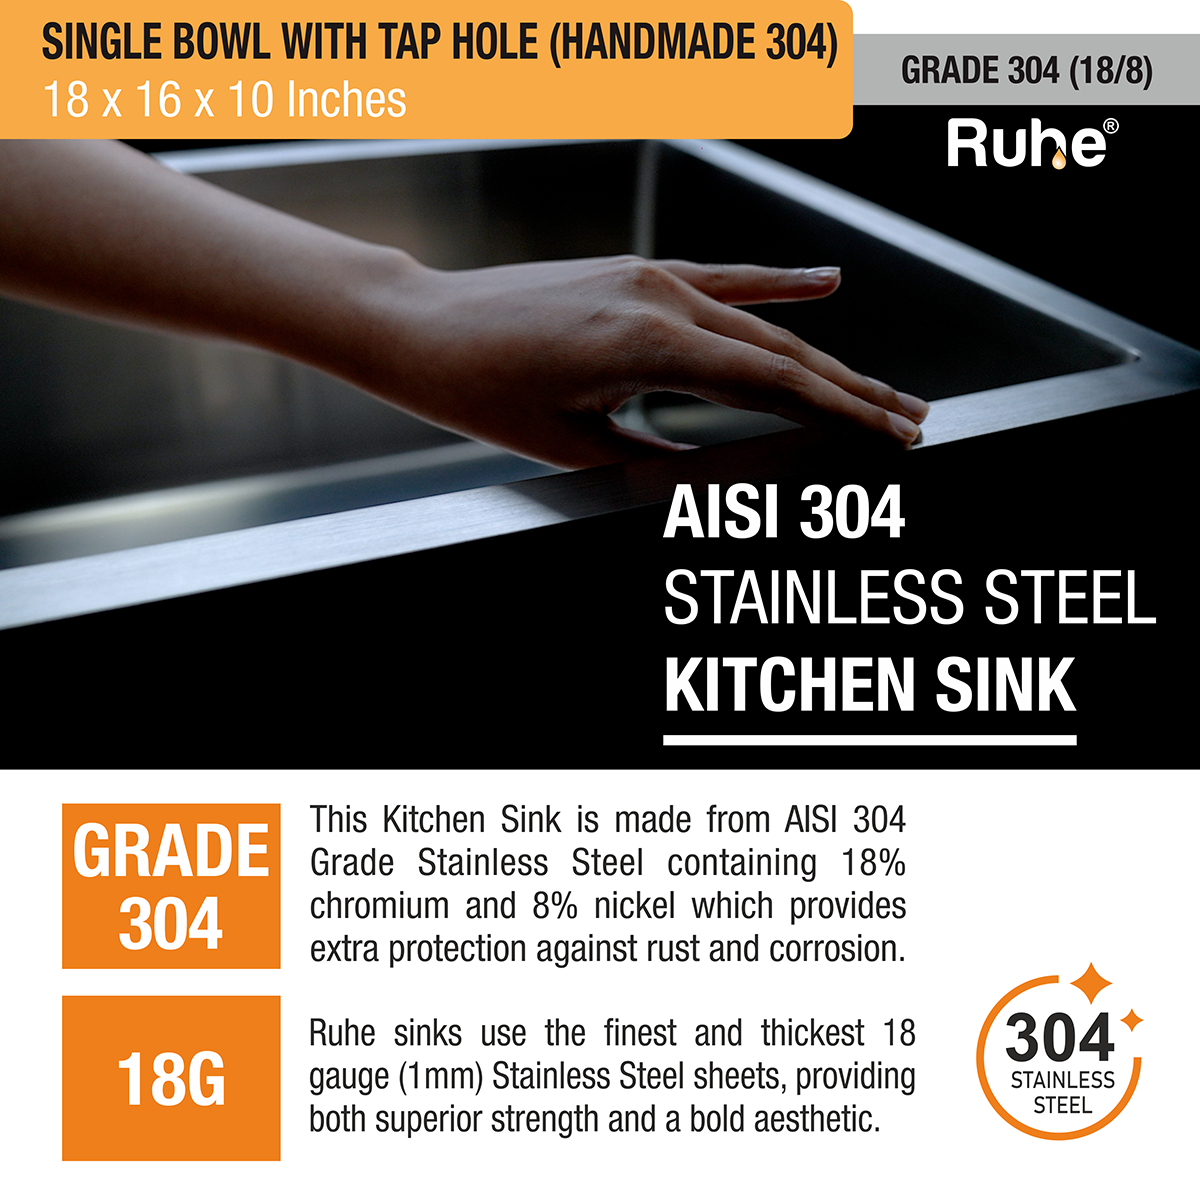 Handmade Single Bowl 304-Grade Kitchen Sink (18 x 16 x 10 Inches) with Tap Hole stainless steel